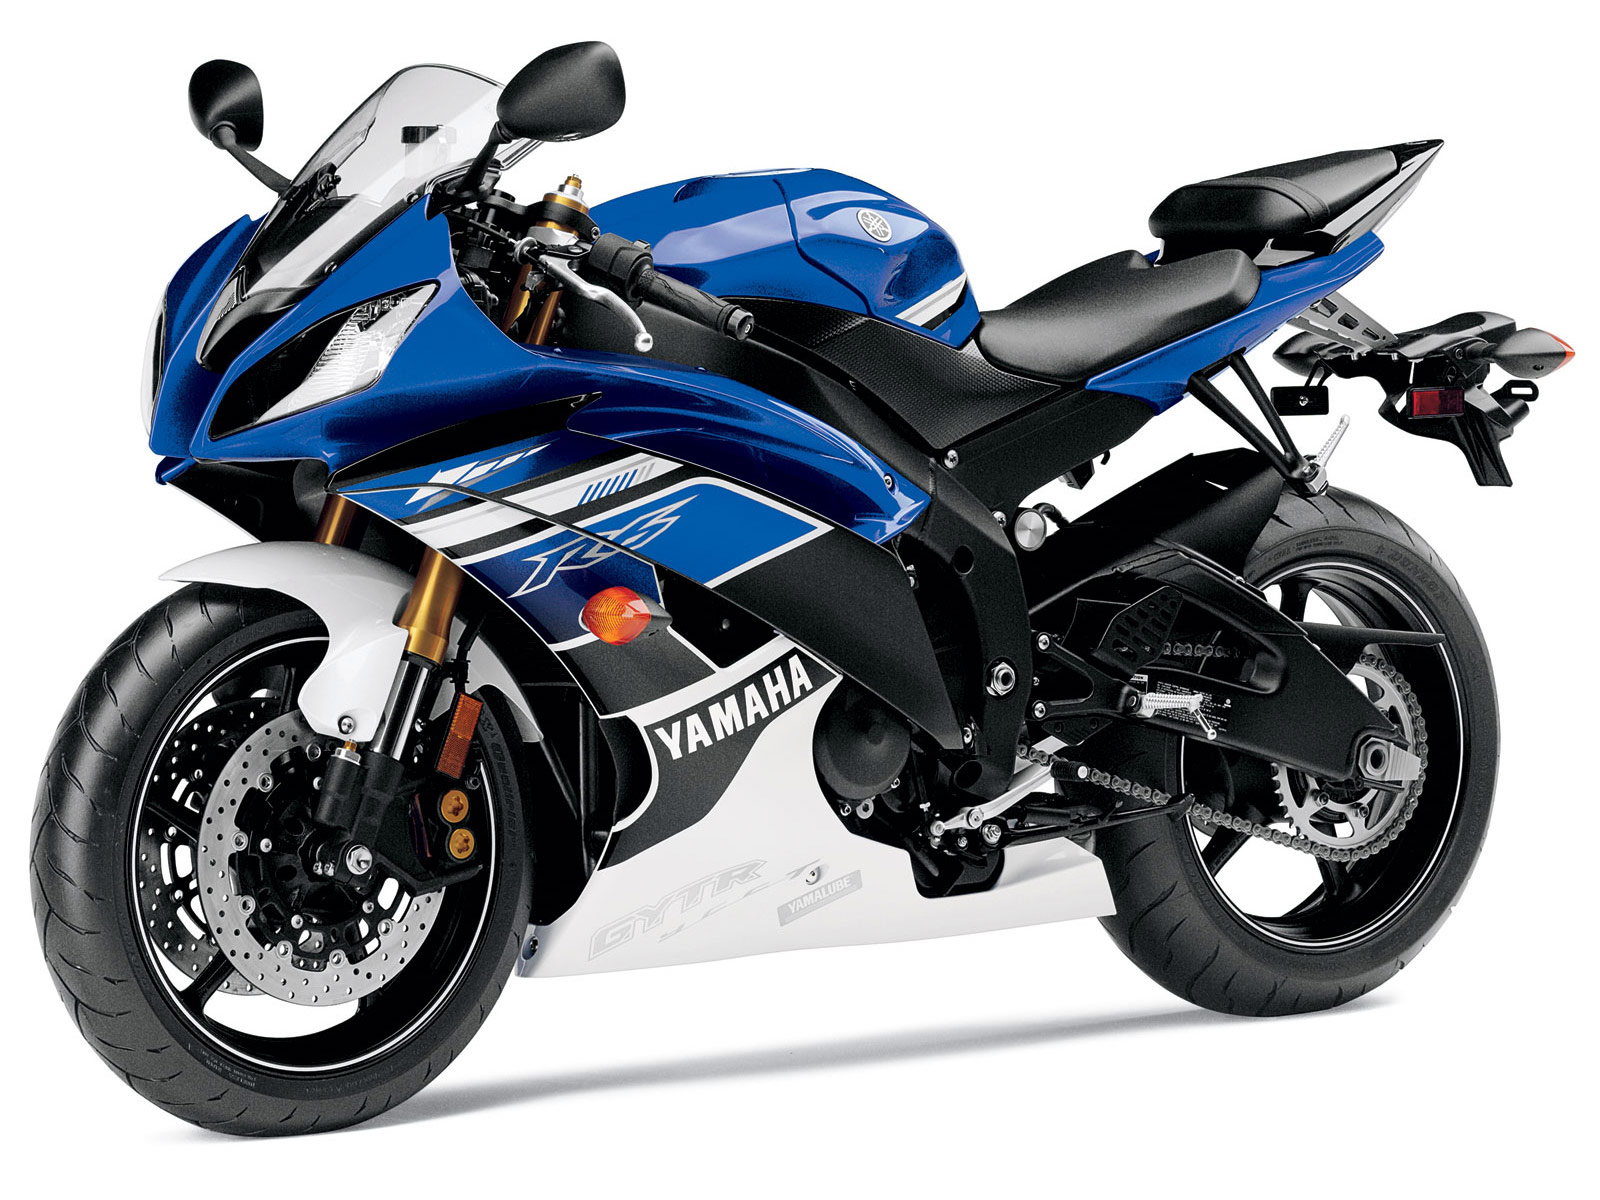 Motorcycle Insurance Information | 2013 Yamaha YZF-R6 pictures, specs